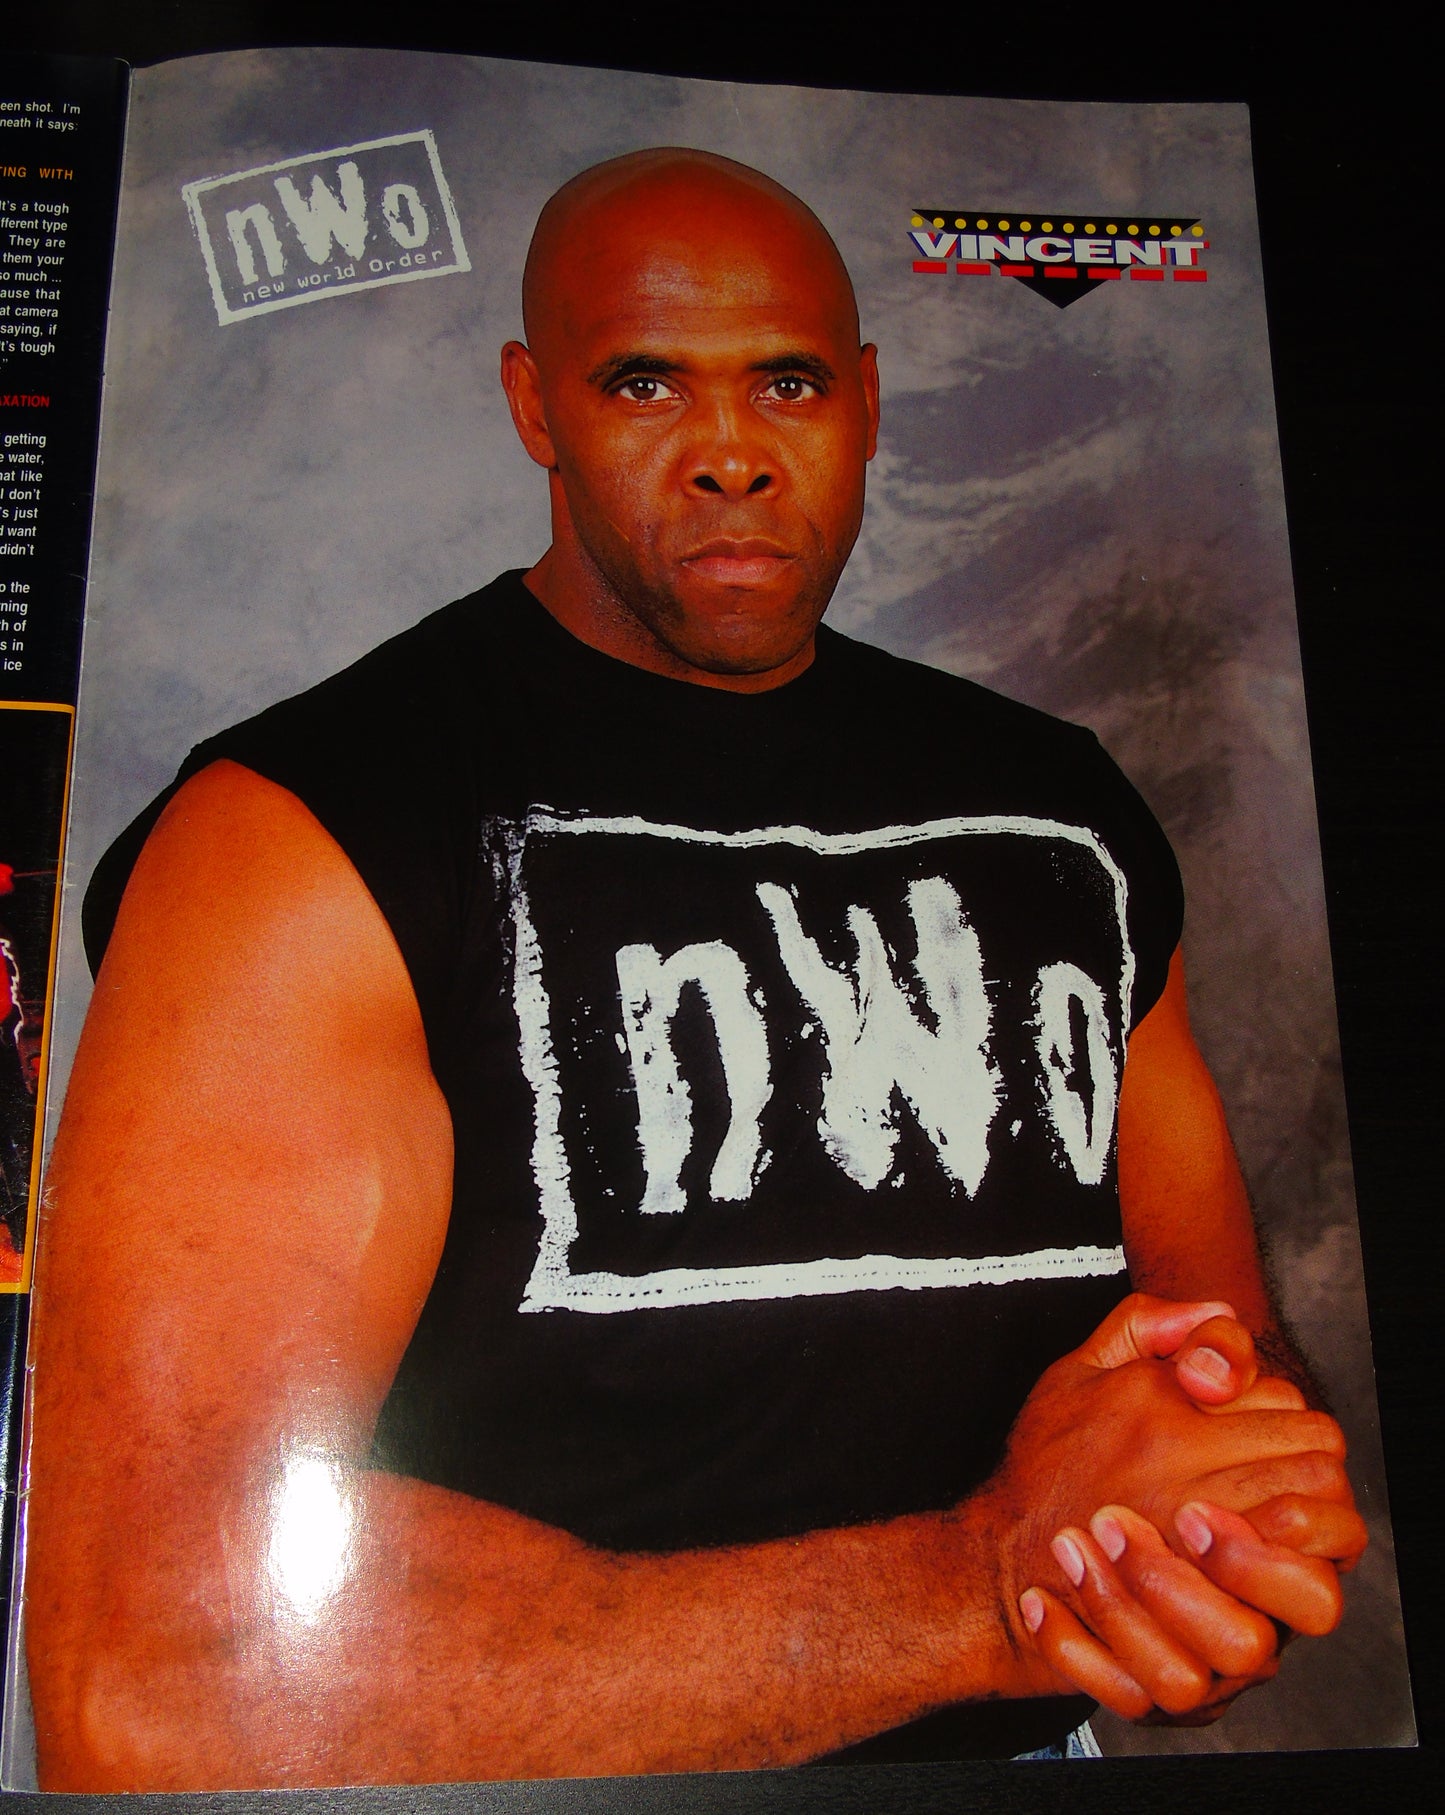 WCW Magazine August 1997 Issue 30